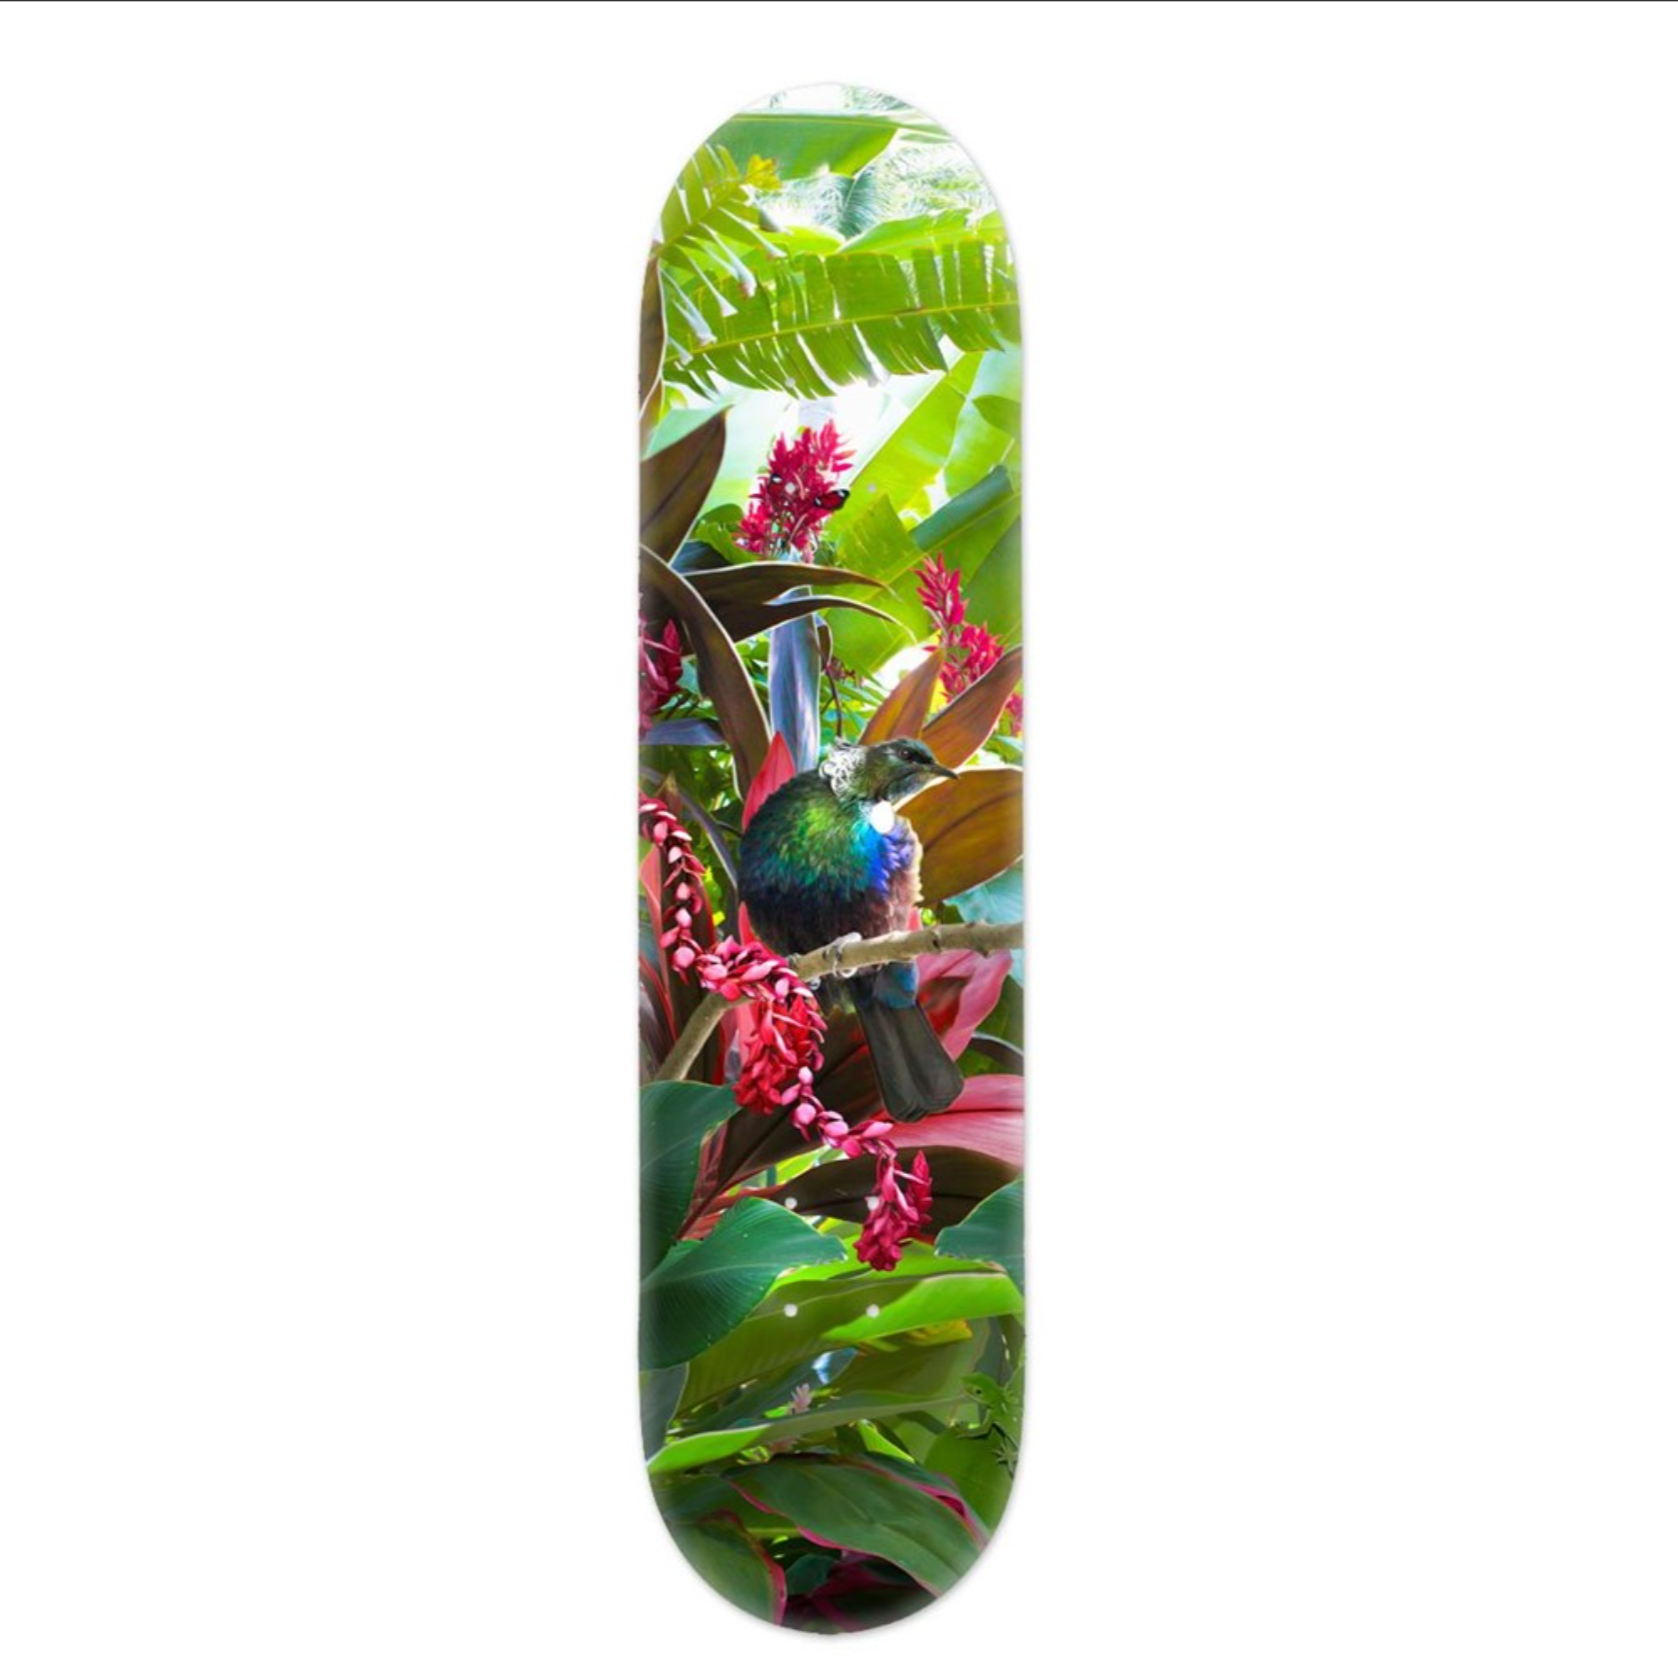 Skate Deck - Hope (Tui), Lucy G